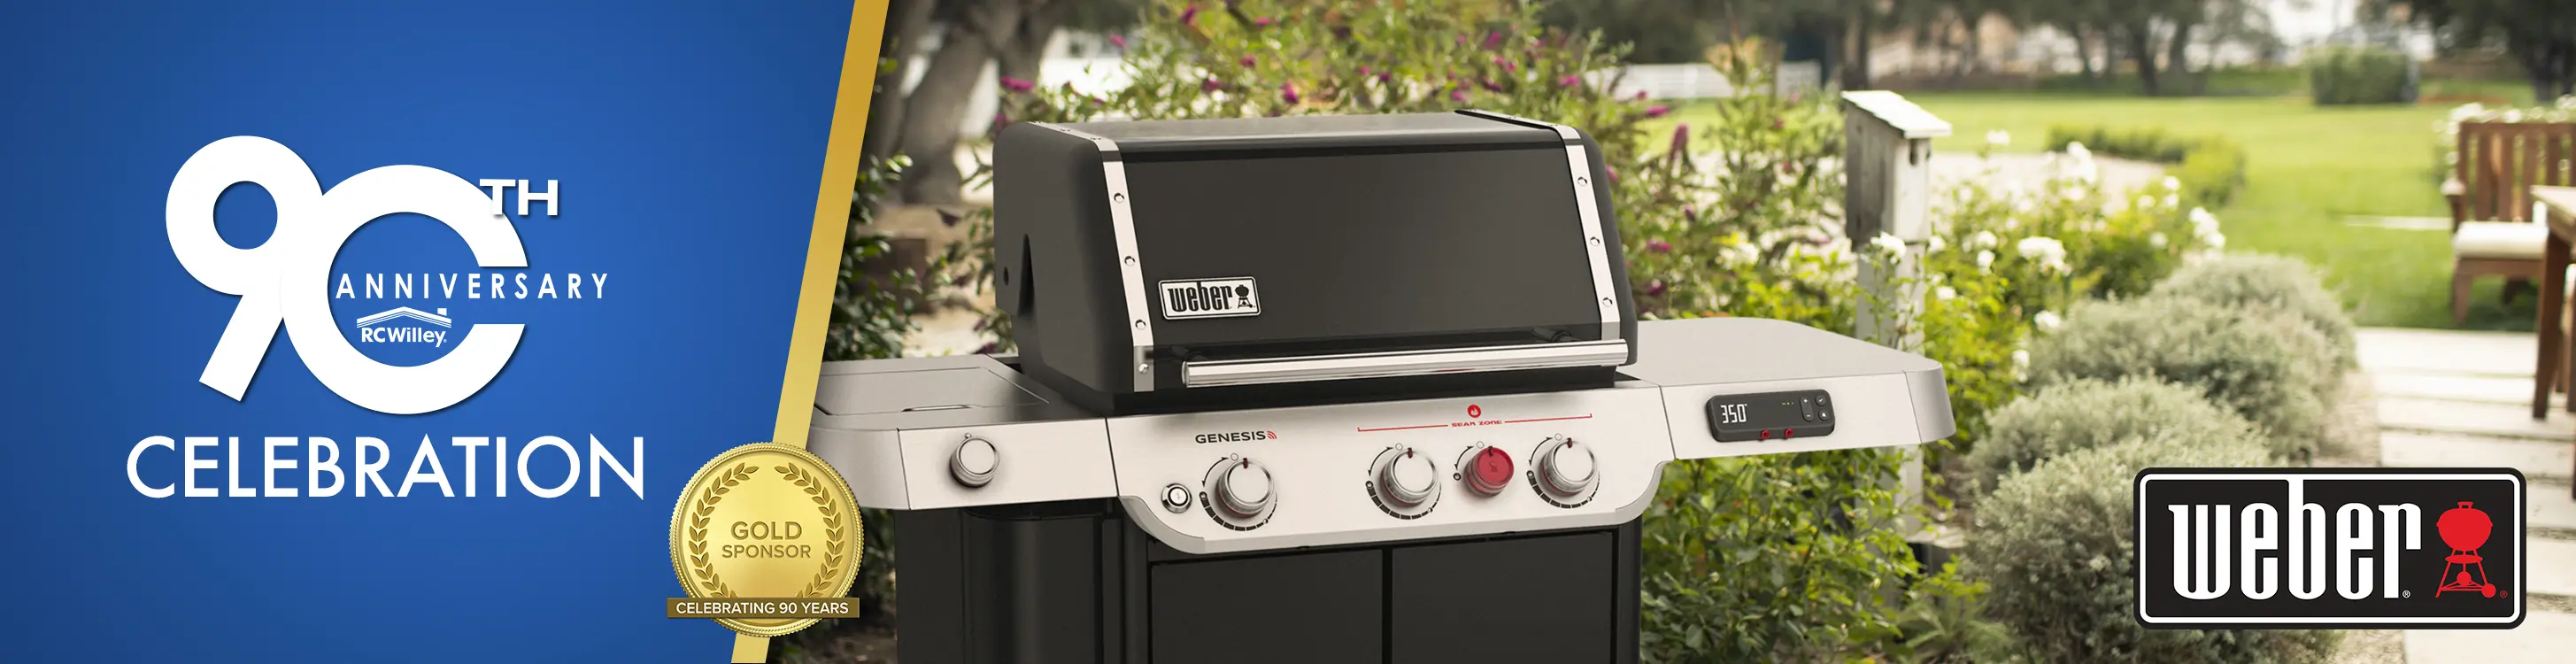 RC Willey's 90th Anniversary Sponsor Weber